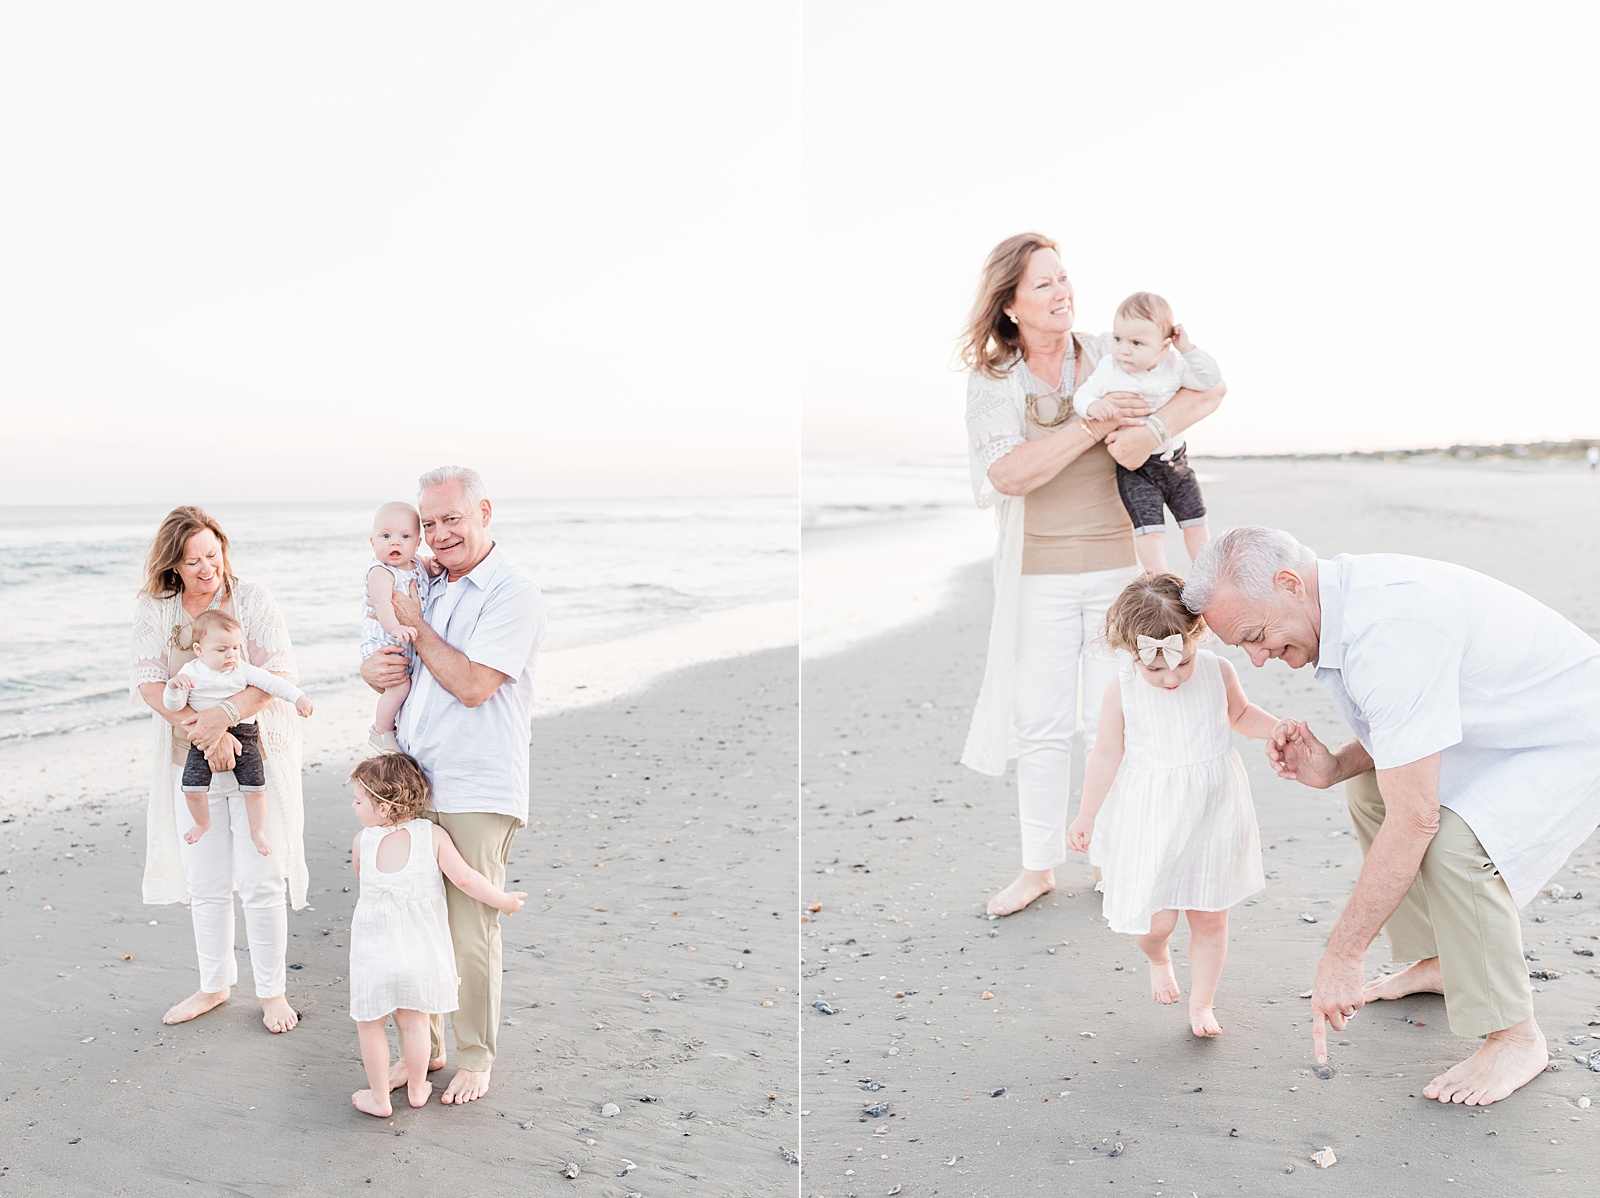 Candid photos of grandparents with grandchildren during Extended family session | Caitlyn Motycka Photography